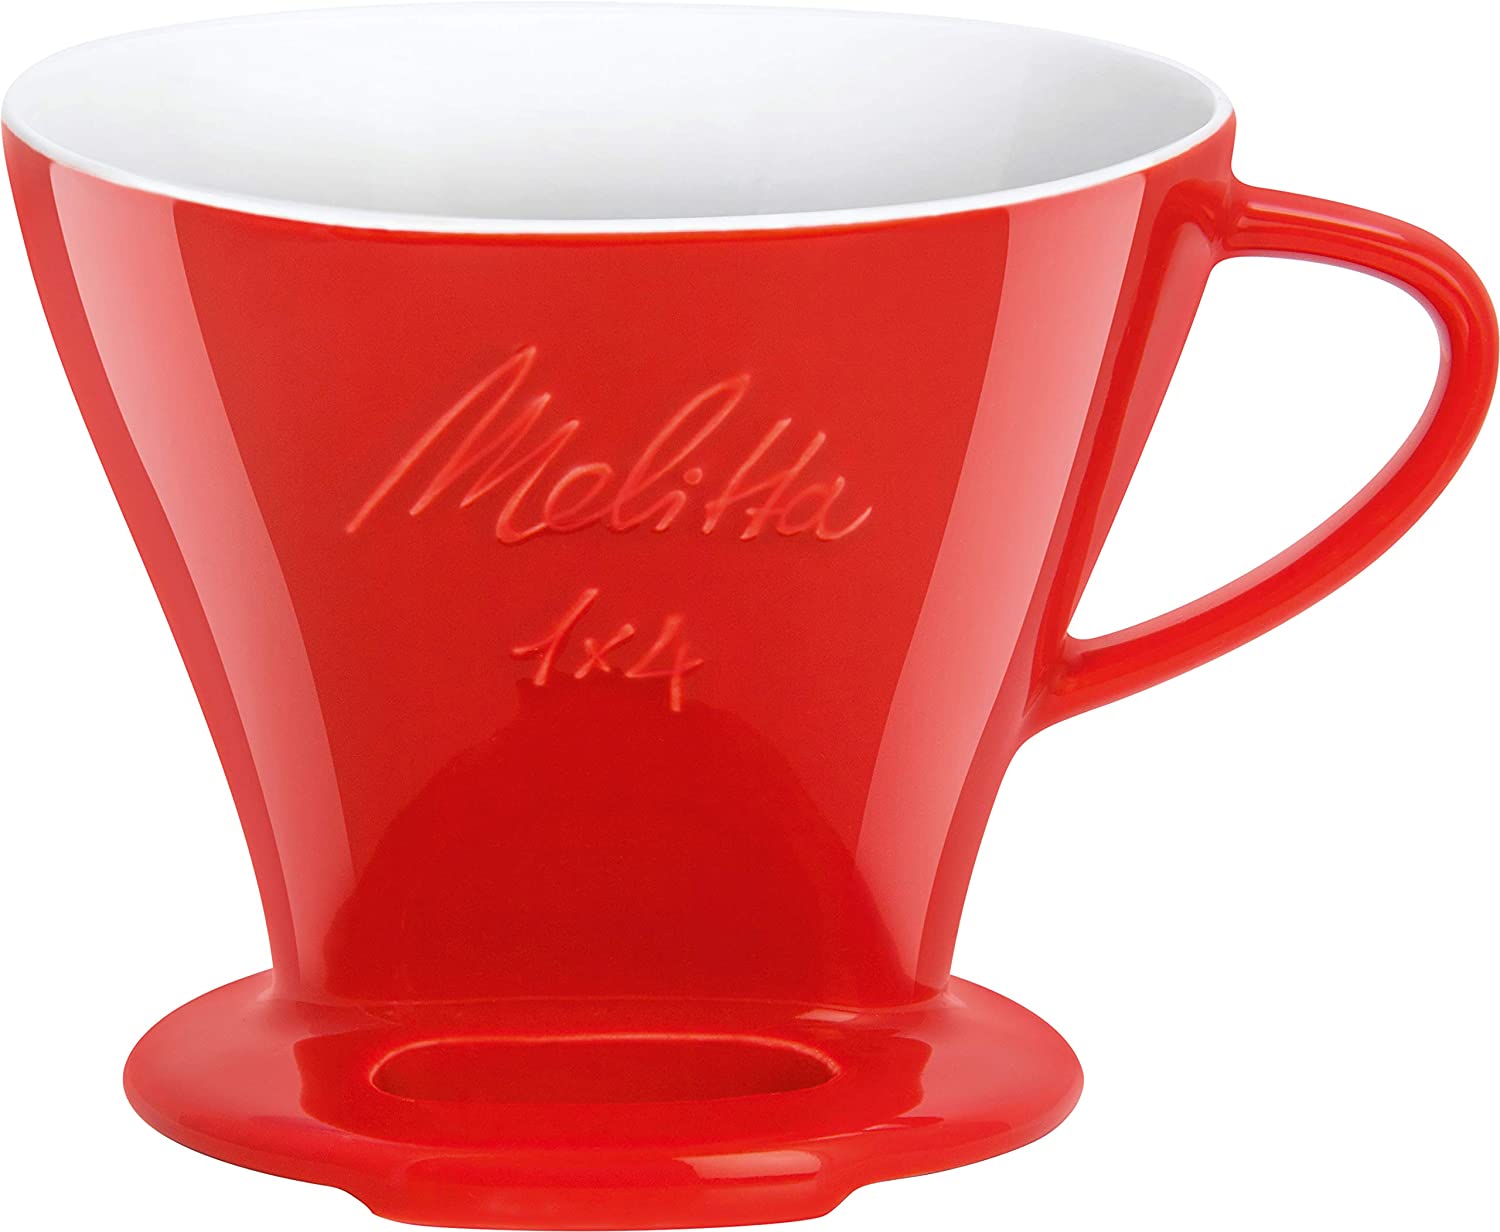 Melitta 219032 Porcelain Coffee Filter Size 1 x 4 Red